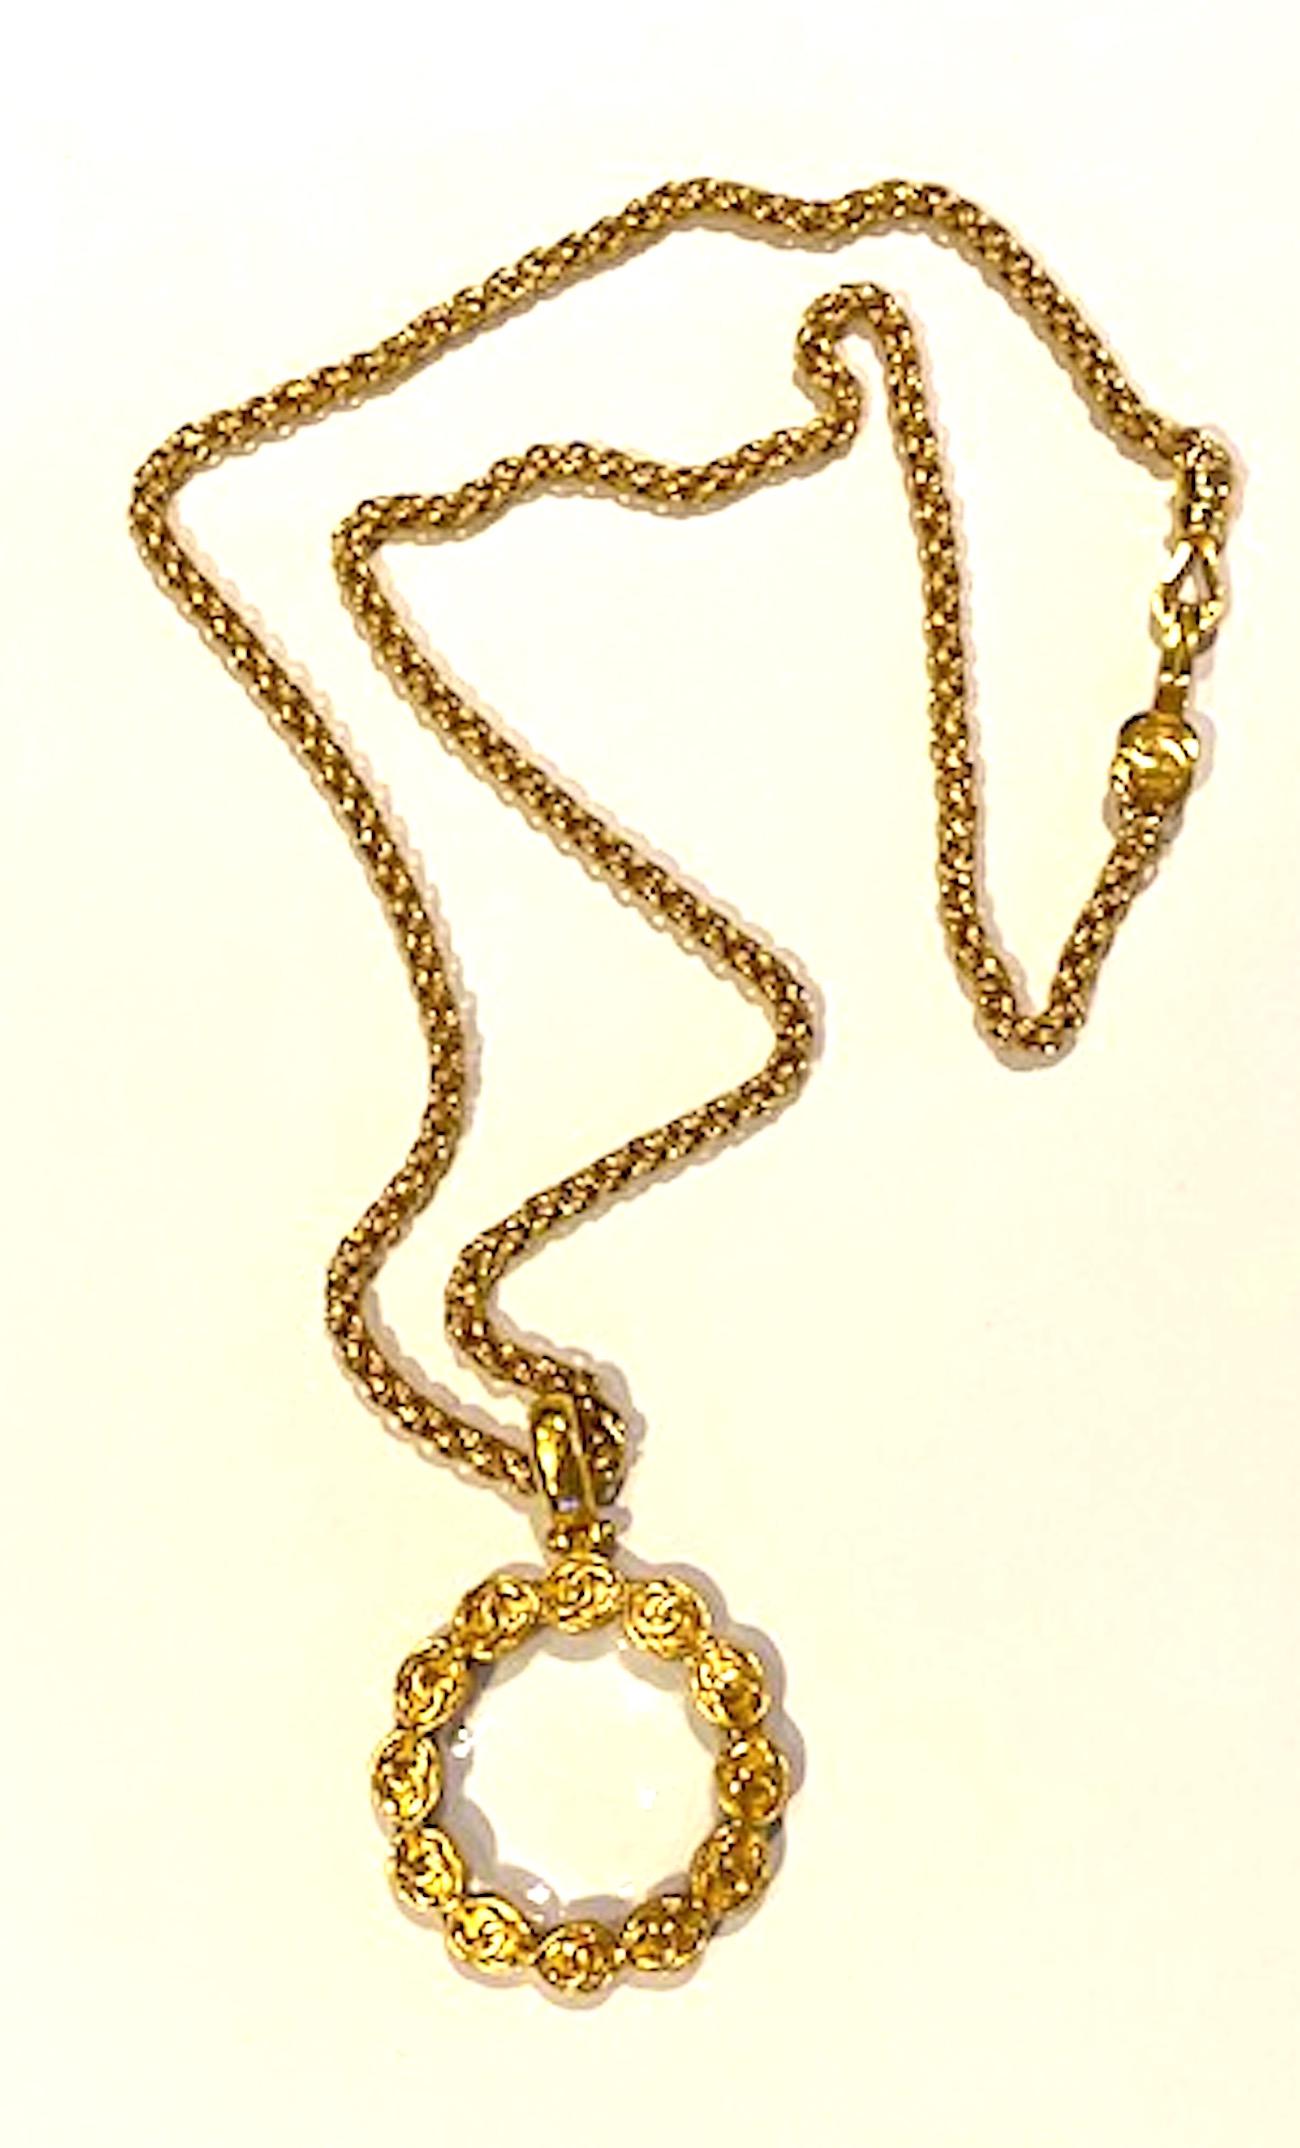 Chanel Magnifying Lens Pendant Necklace, Autumn 1997 Collection 13